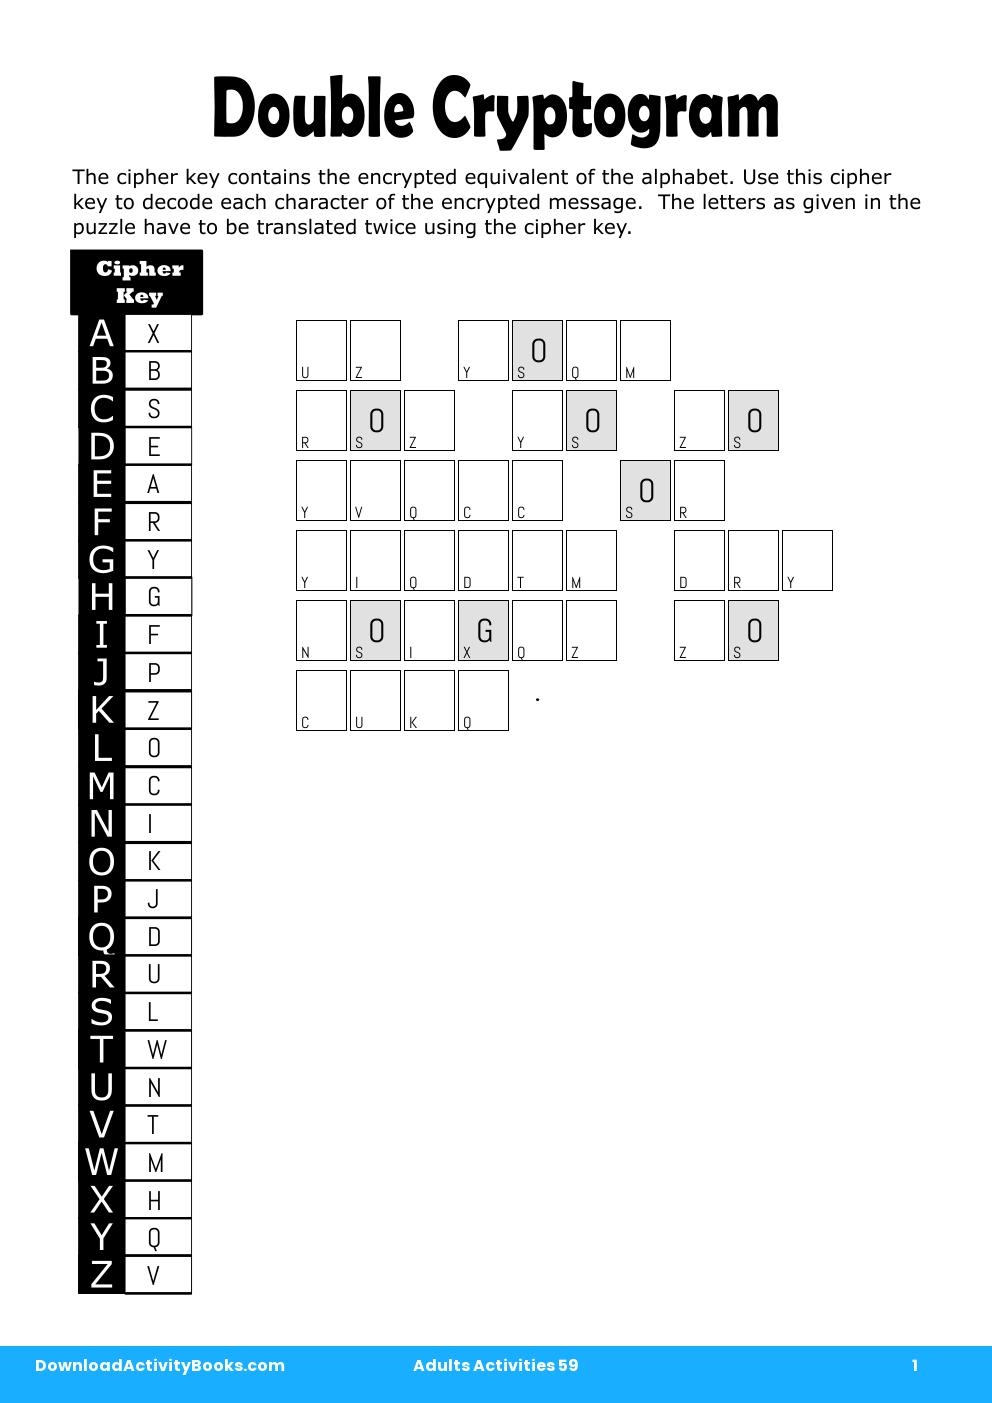 Double Cryptogram in Adults Activities 59